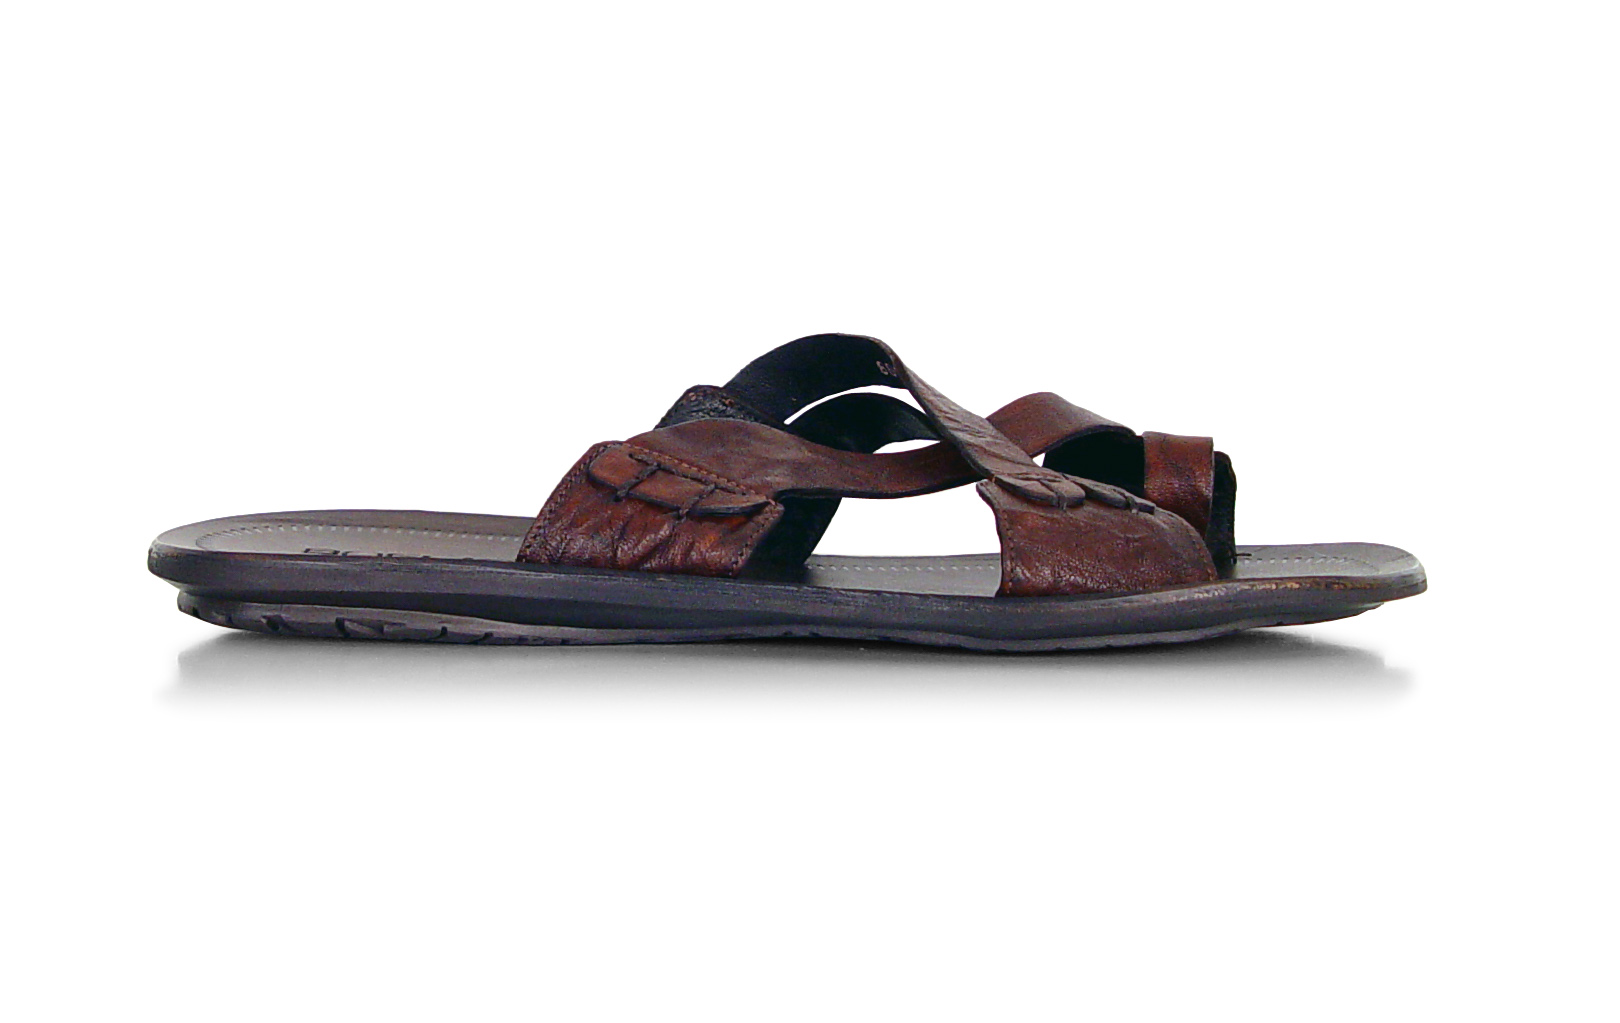 a man wearing sandals and a sandals strap with a brown leather bottom